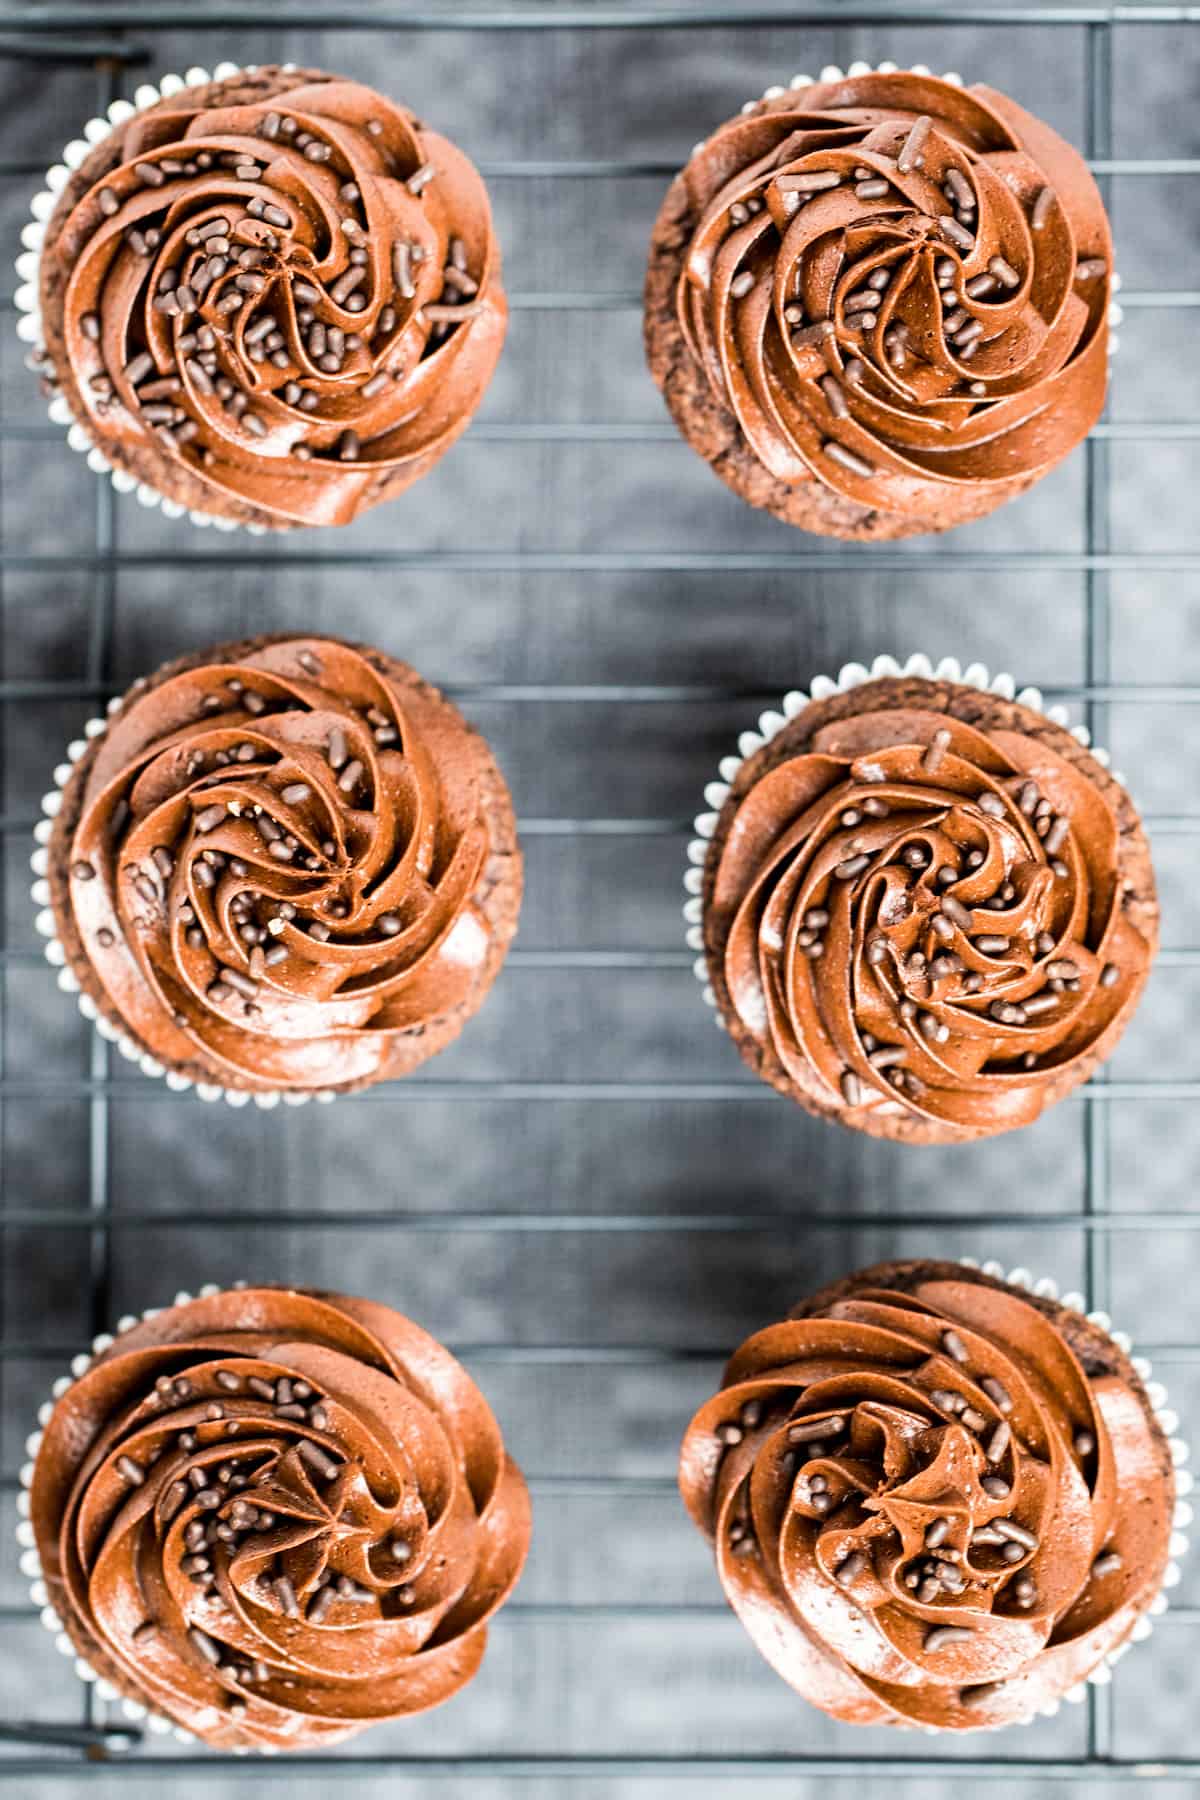 Chocolate cupcakes with frosting topped with chocolate sprinkles on top of a wire rack.